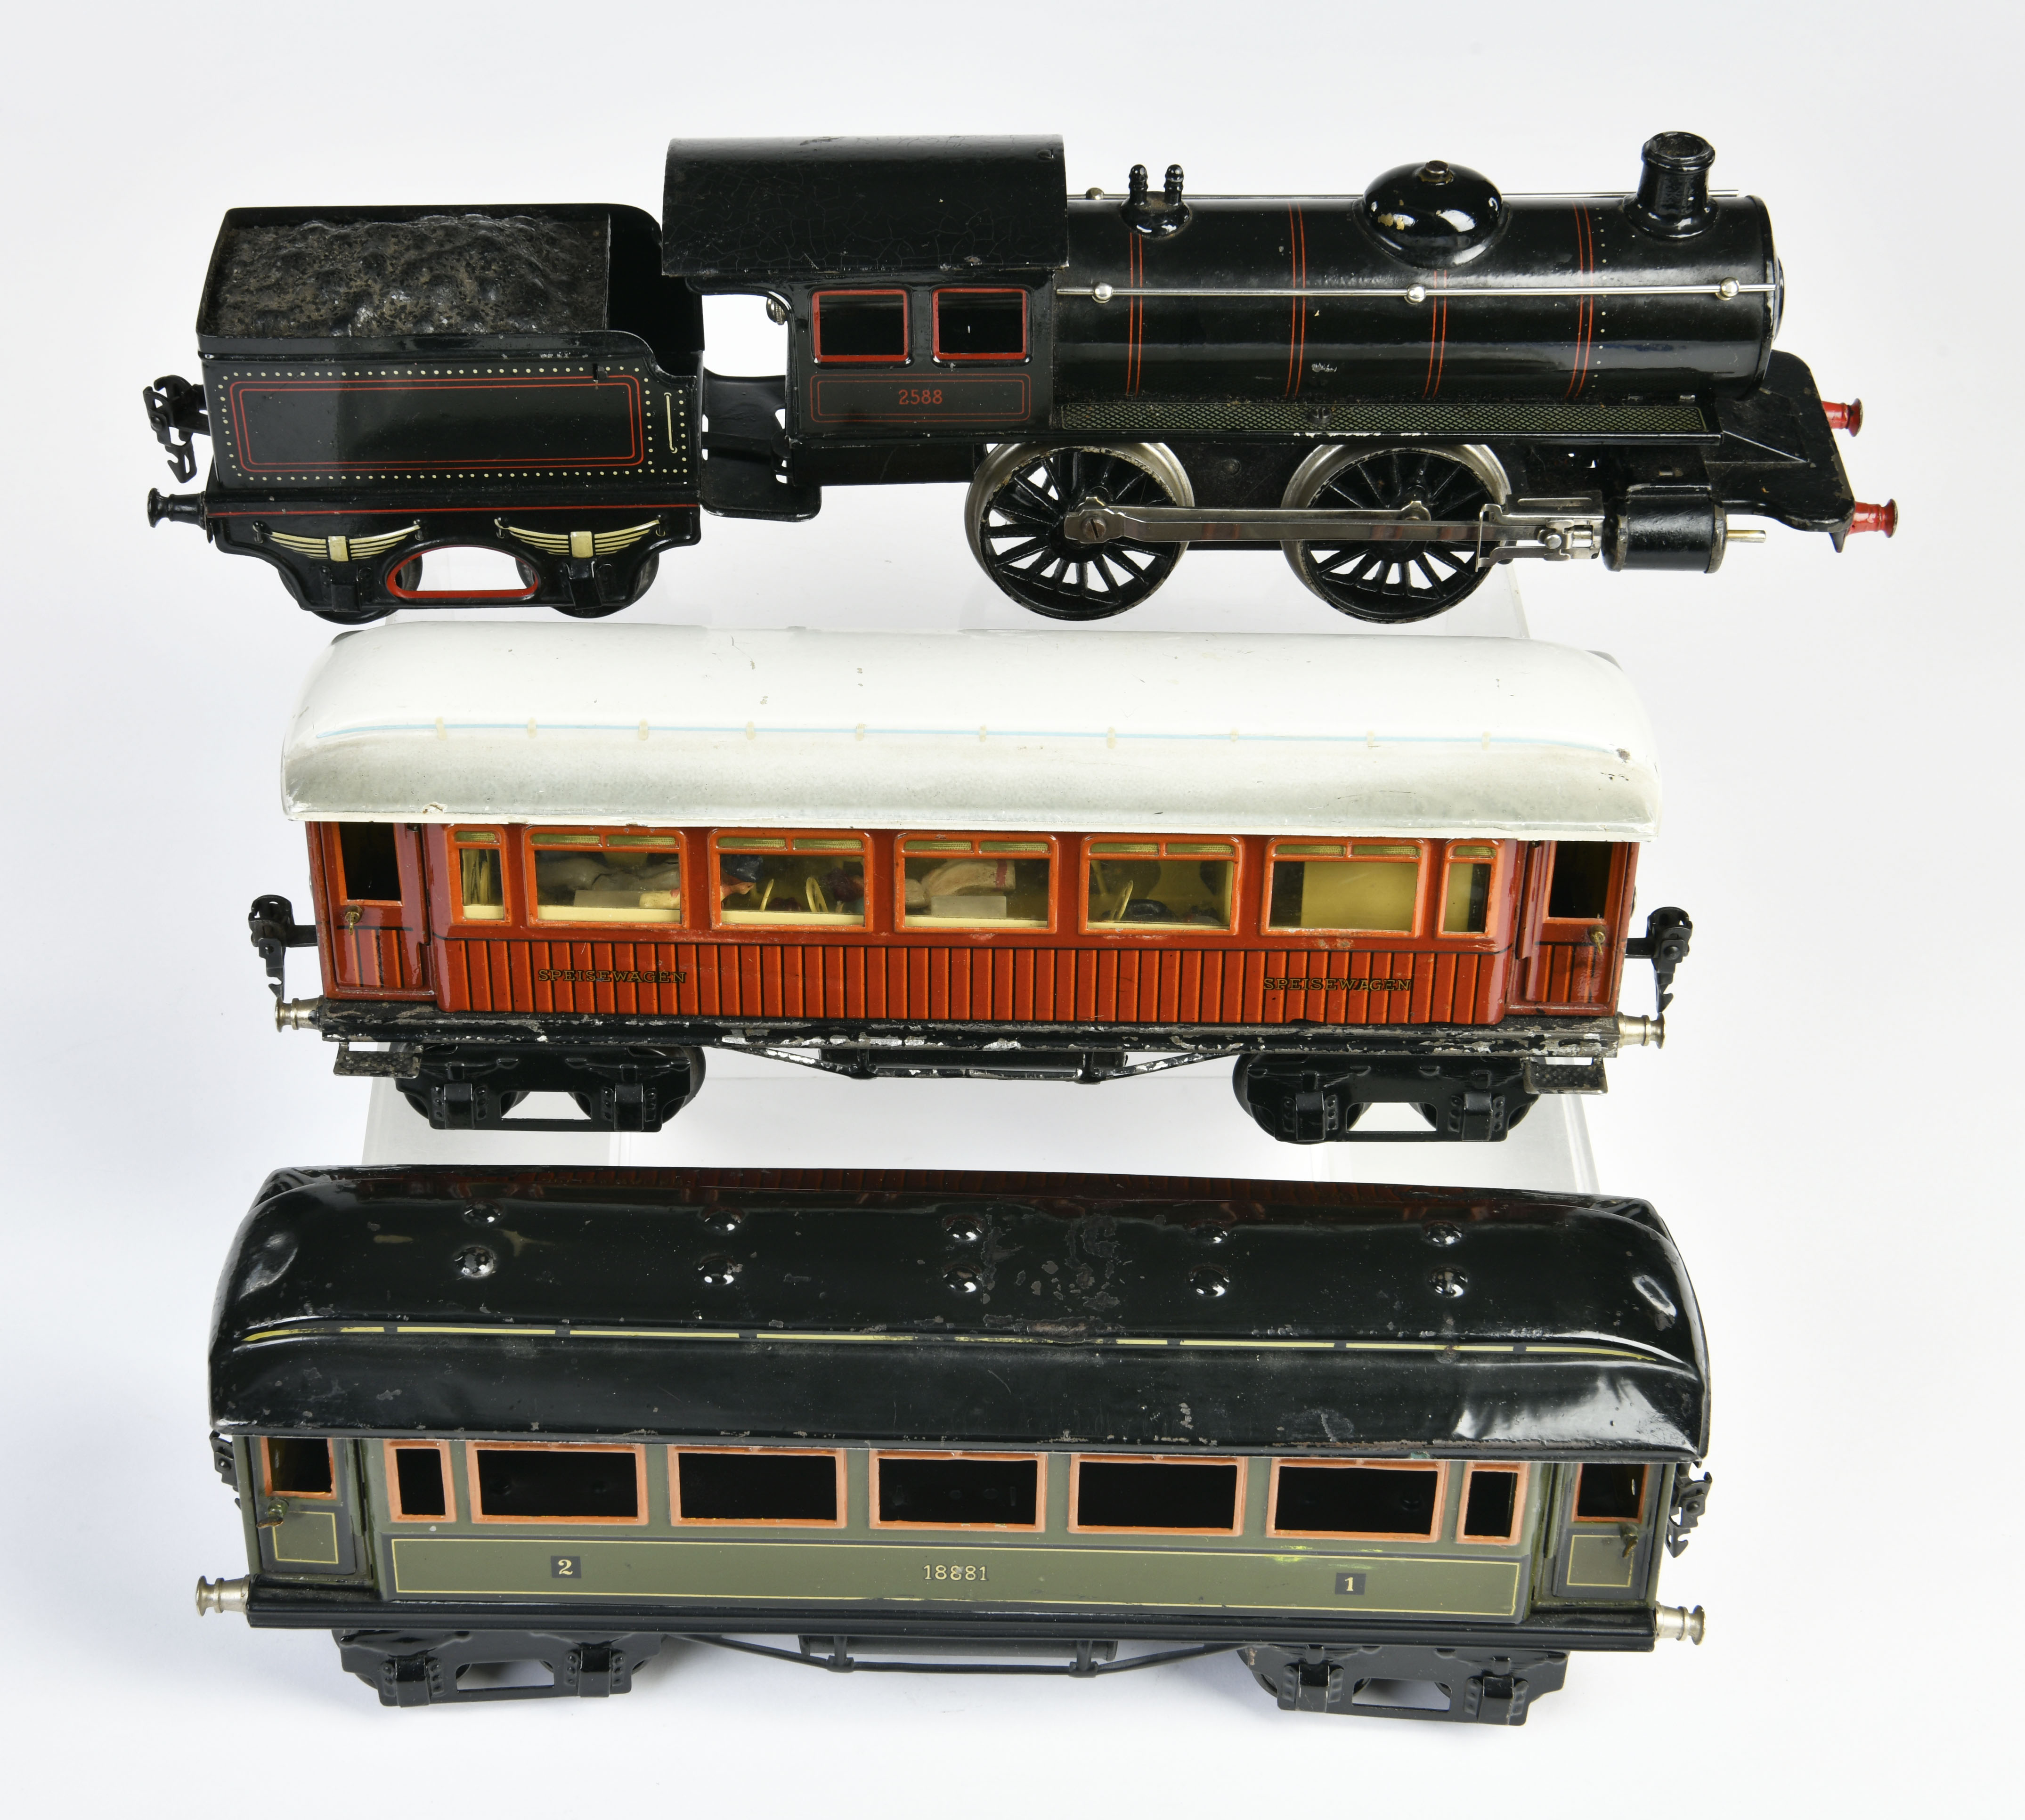 Märklin, loco 2588 with tender and 2 wagons, gauge 1, one wagon with interior and figures, cw ok,